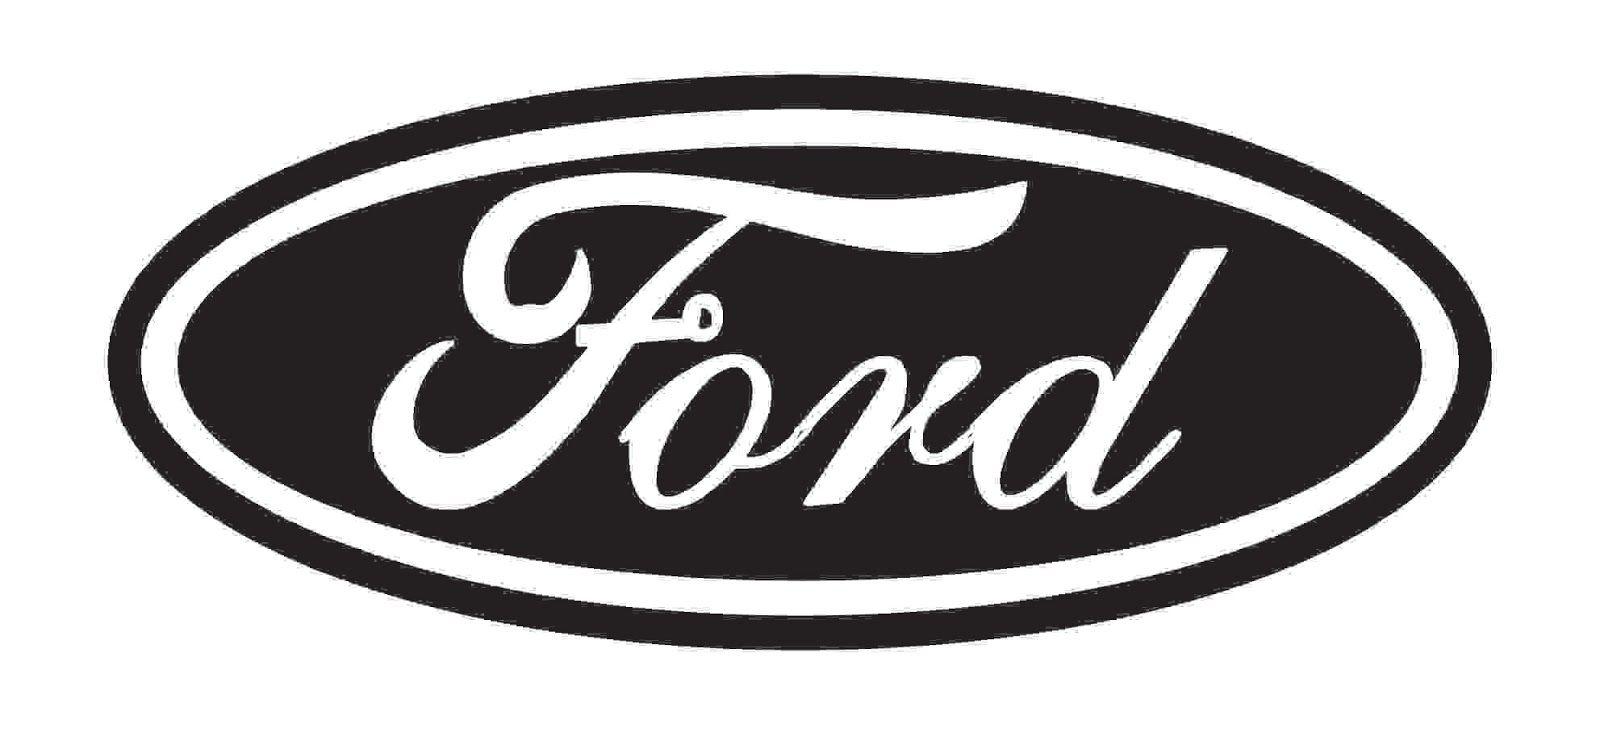 Vintage Ford Logo - Free Ford Cliparts, Download Free Clip Art, Free Clip Art on Clipart ...